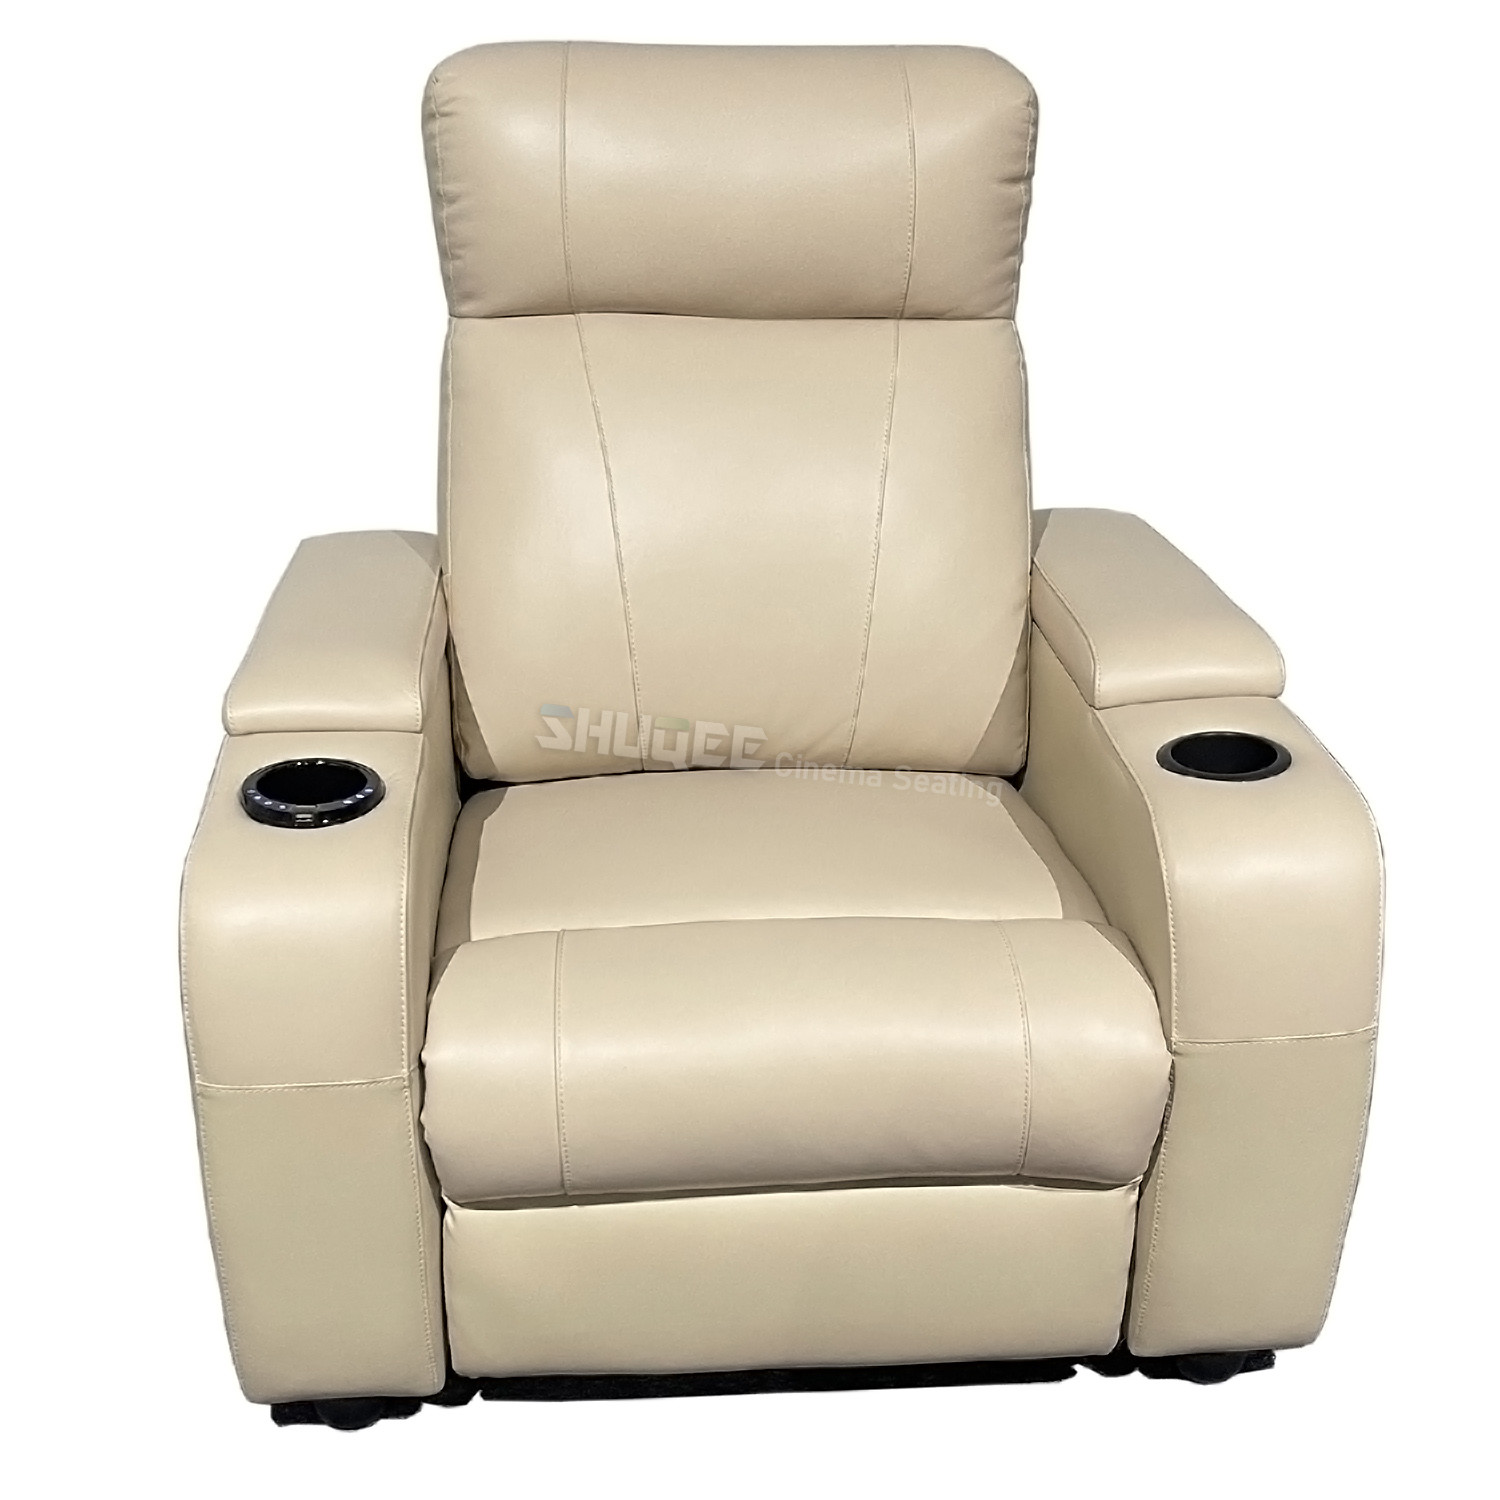  Modern Genuine Leather Cinema VIP Sofa Luxury Home Theater Chair Manufactures